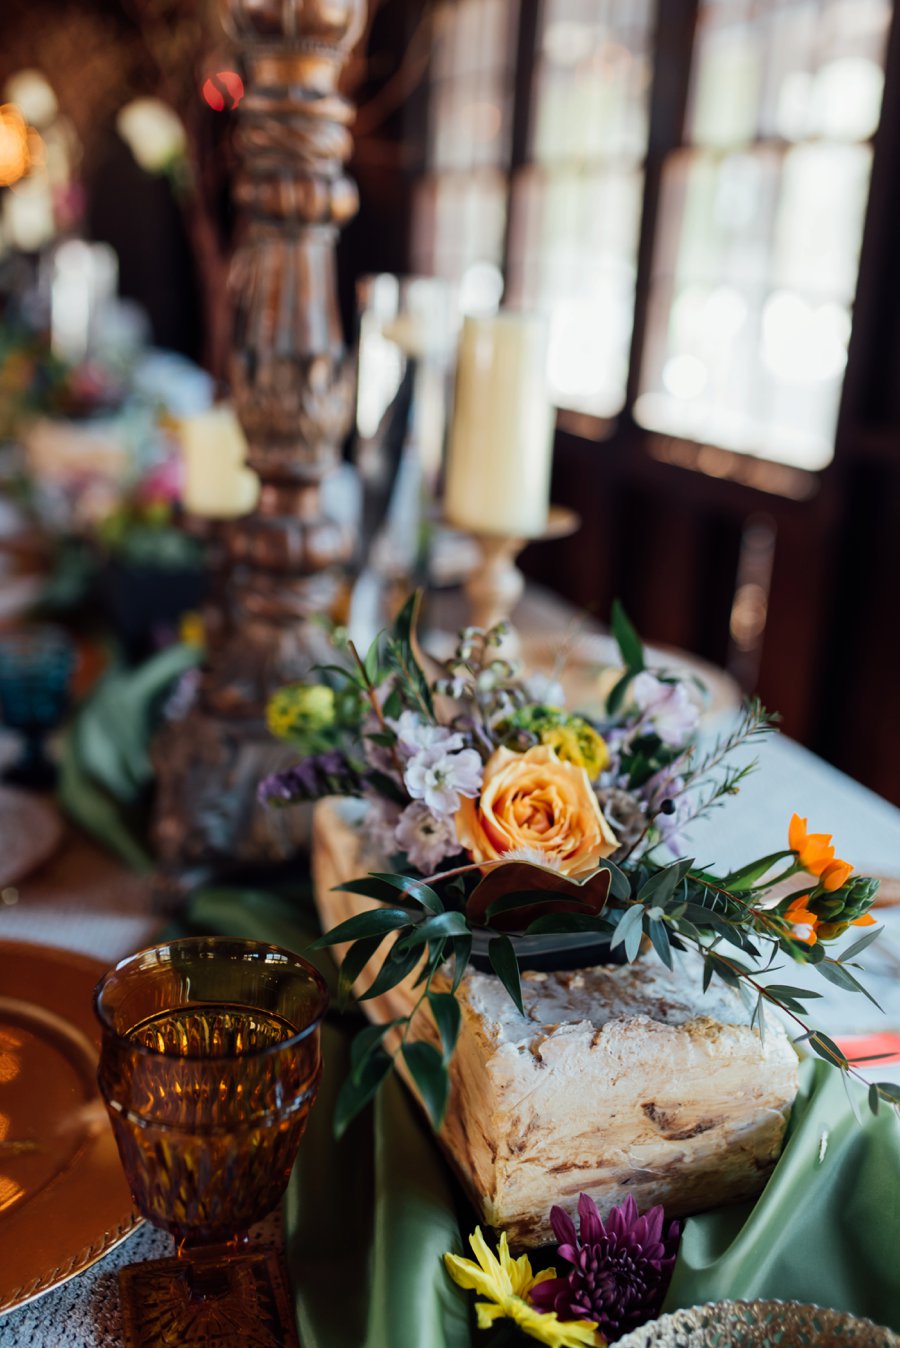 A Colorful & Whimsical Glamping Wedding Weekend via TheELD.com